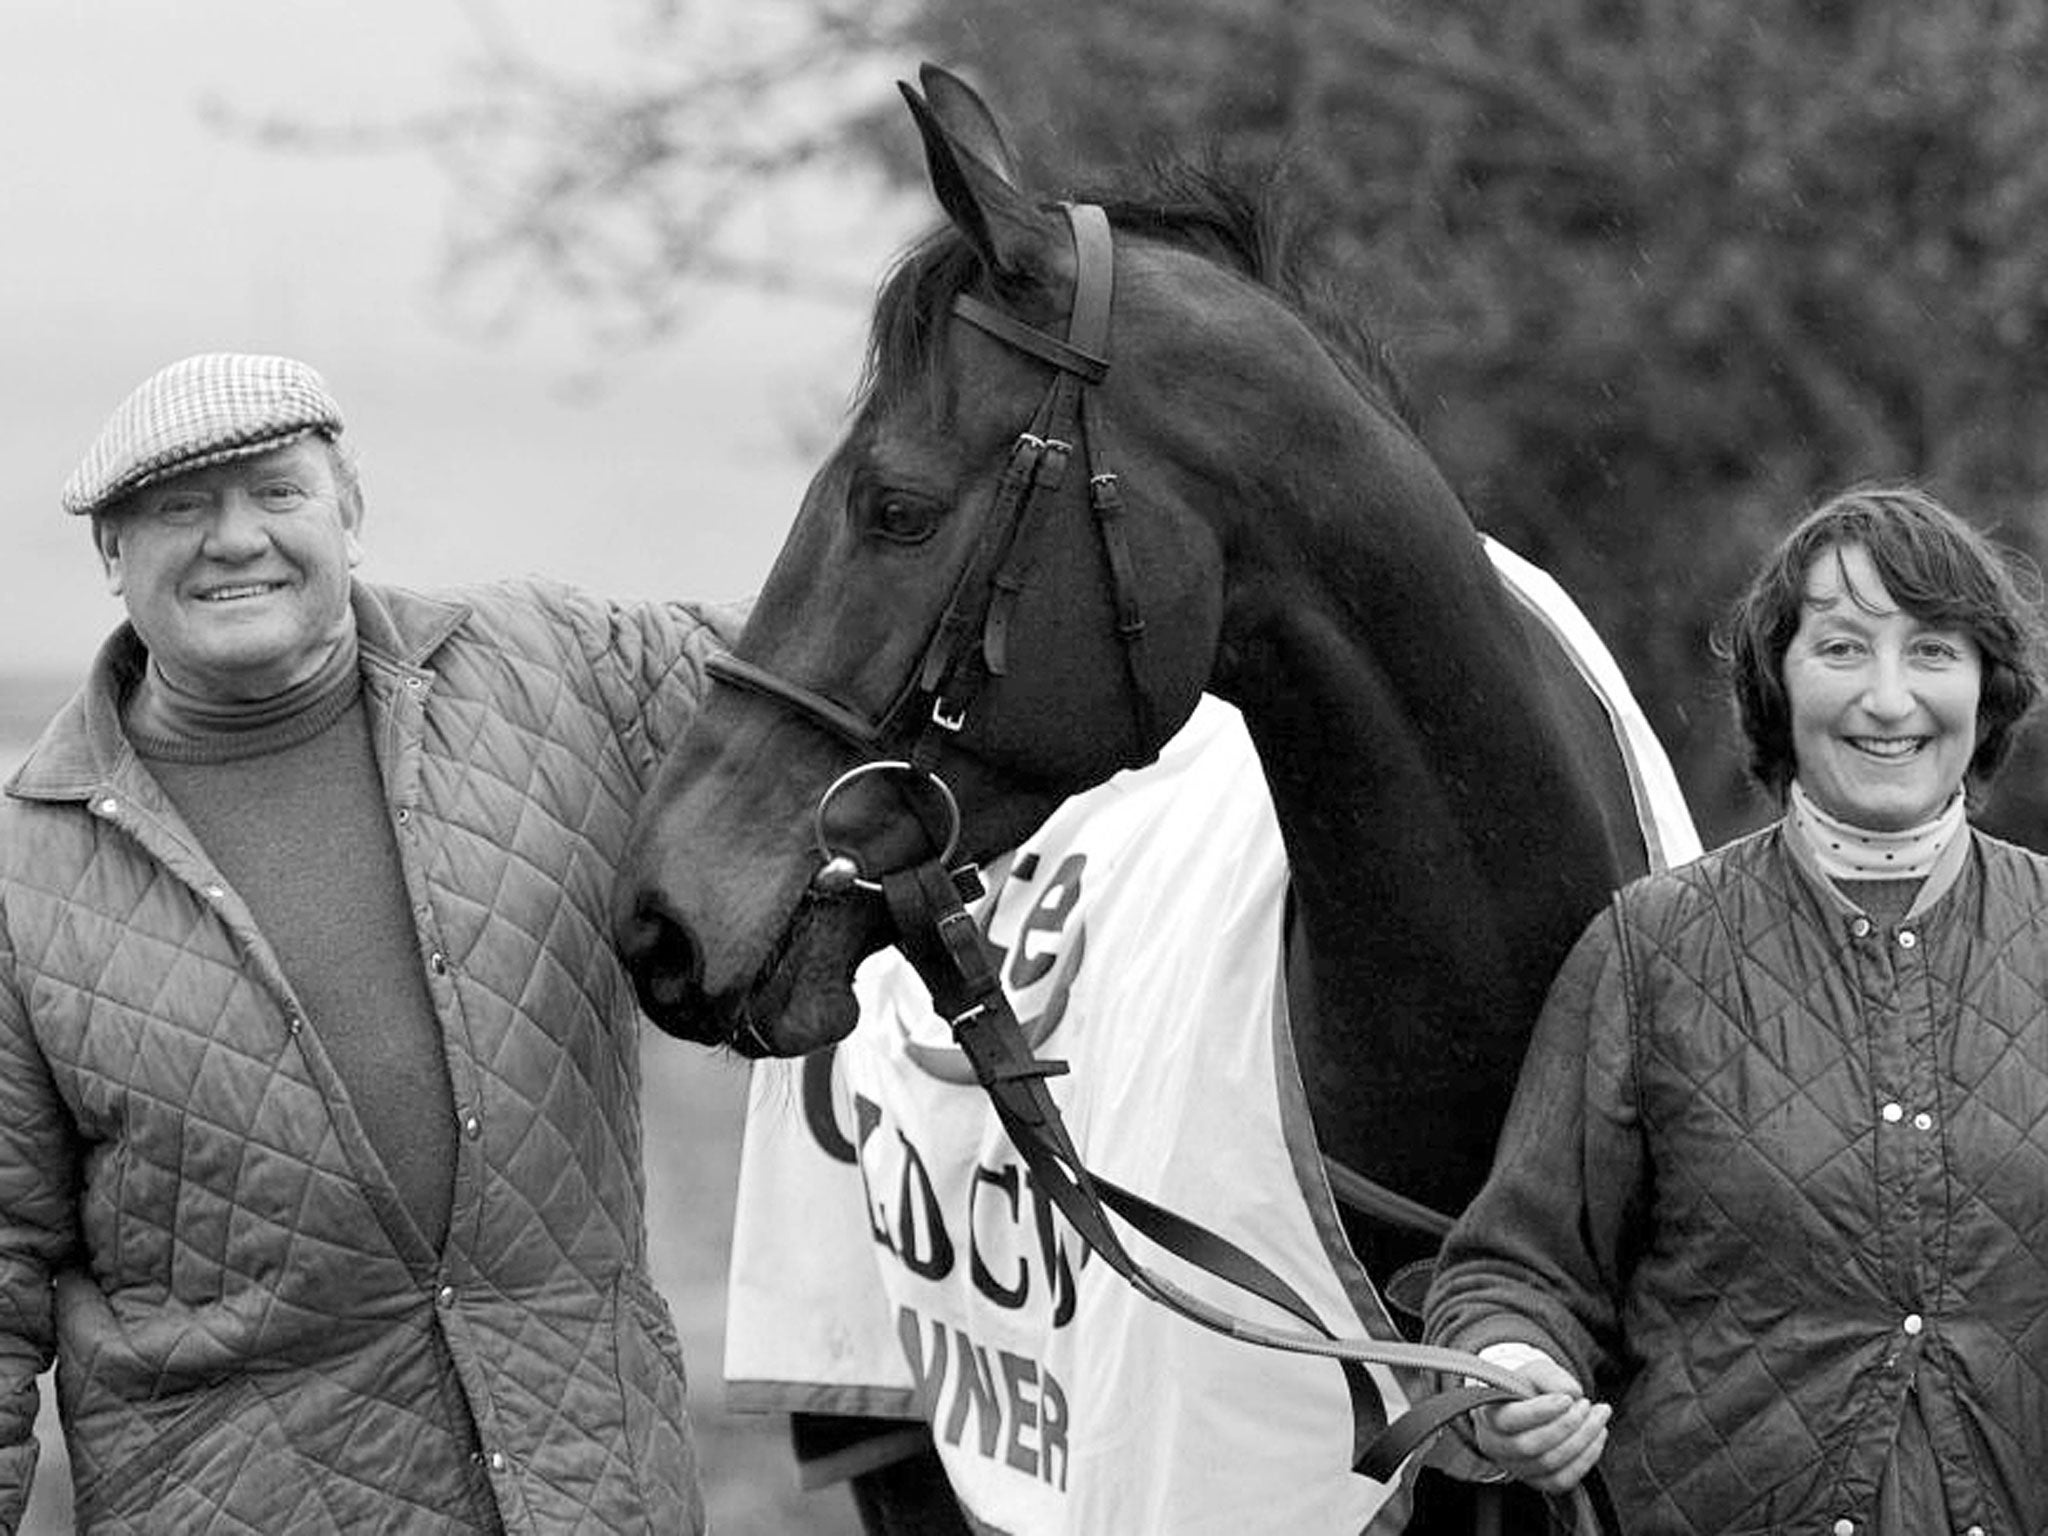 Biddlecombe and his wife Henrietta Knight in 2002 with their horse Best Mate, who won the Cheltenham Gold Cup three years in a row